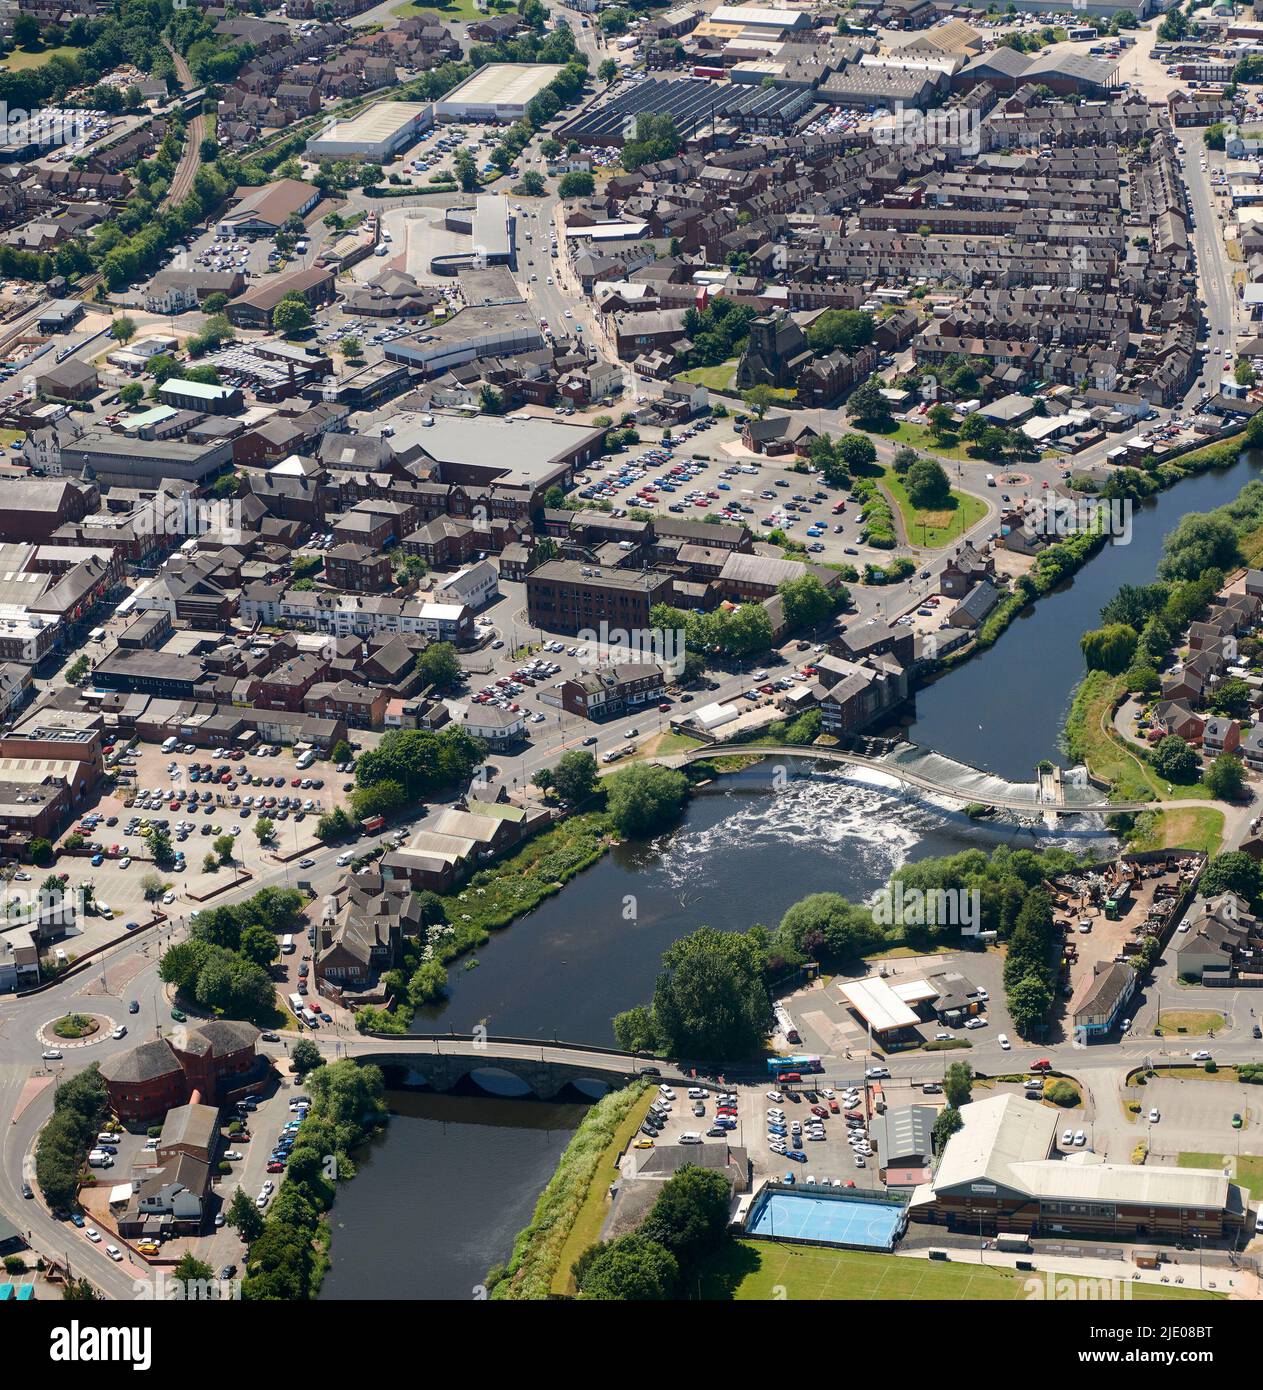 An aerial view of castleford, West Yorkshire, northern England, UK showing the river Aire, and new housing developments Stock Photo